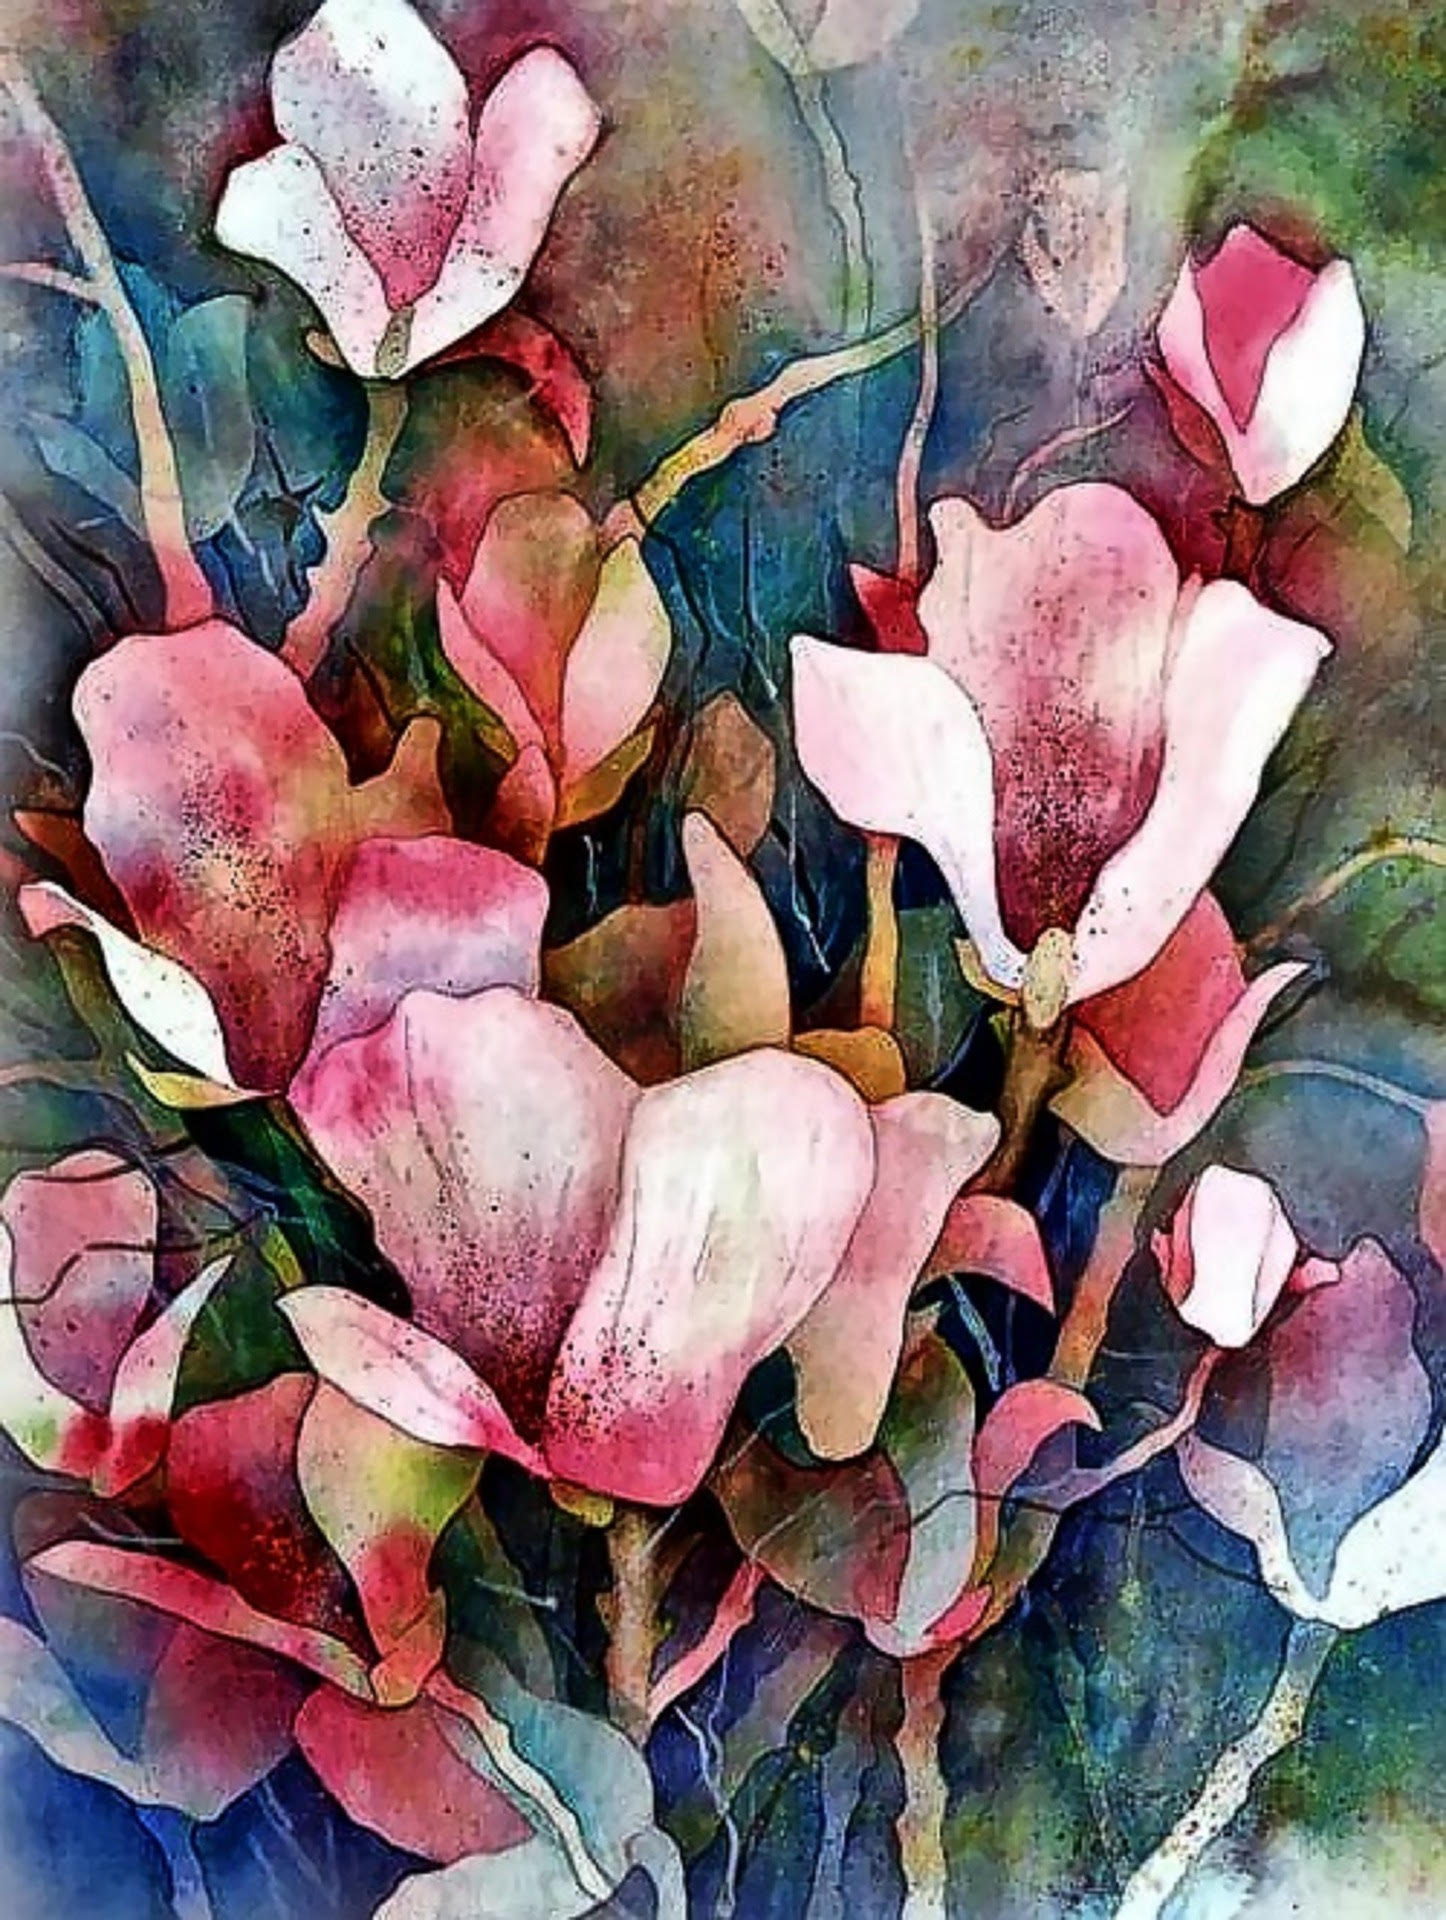 Watercolor Flowers Pop Up with Nicole Packard 7-9PM Fri February 22, 2021